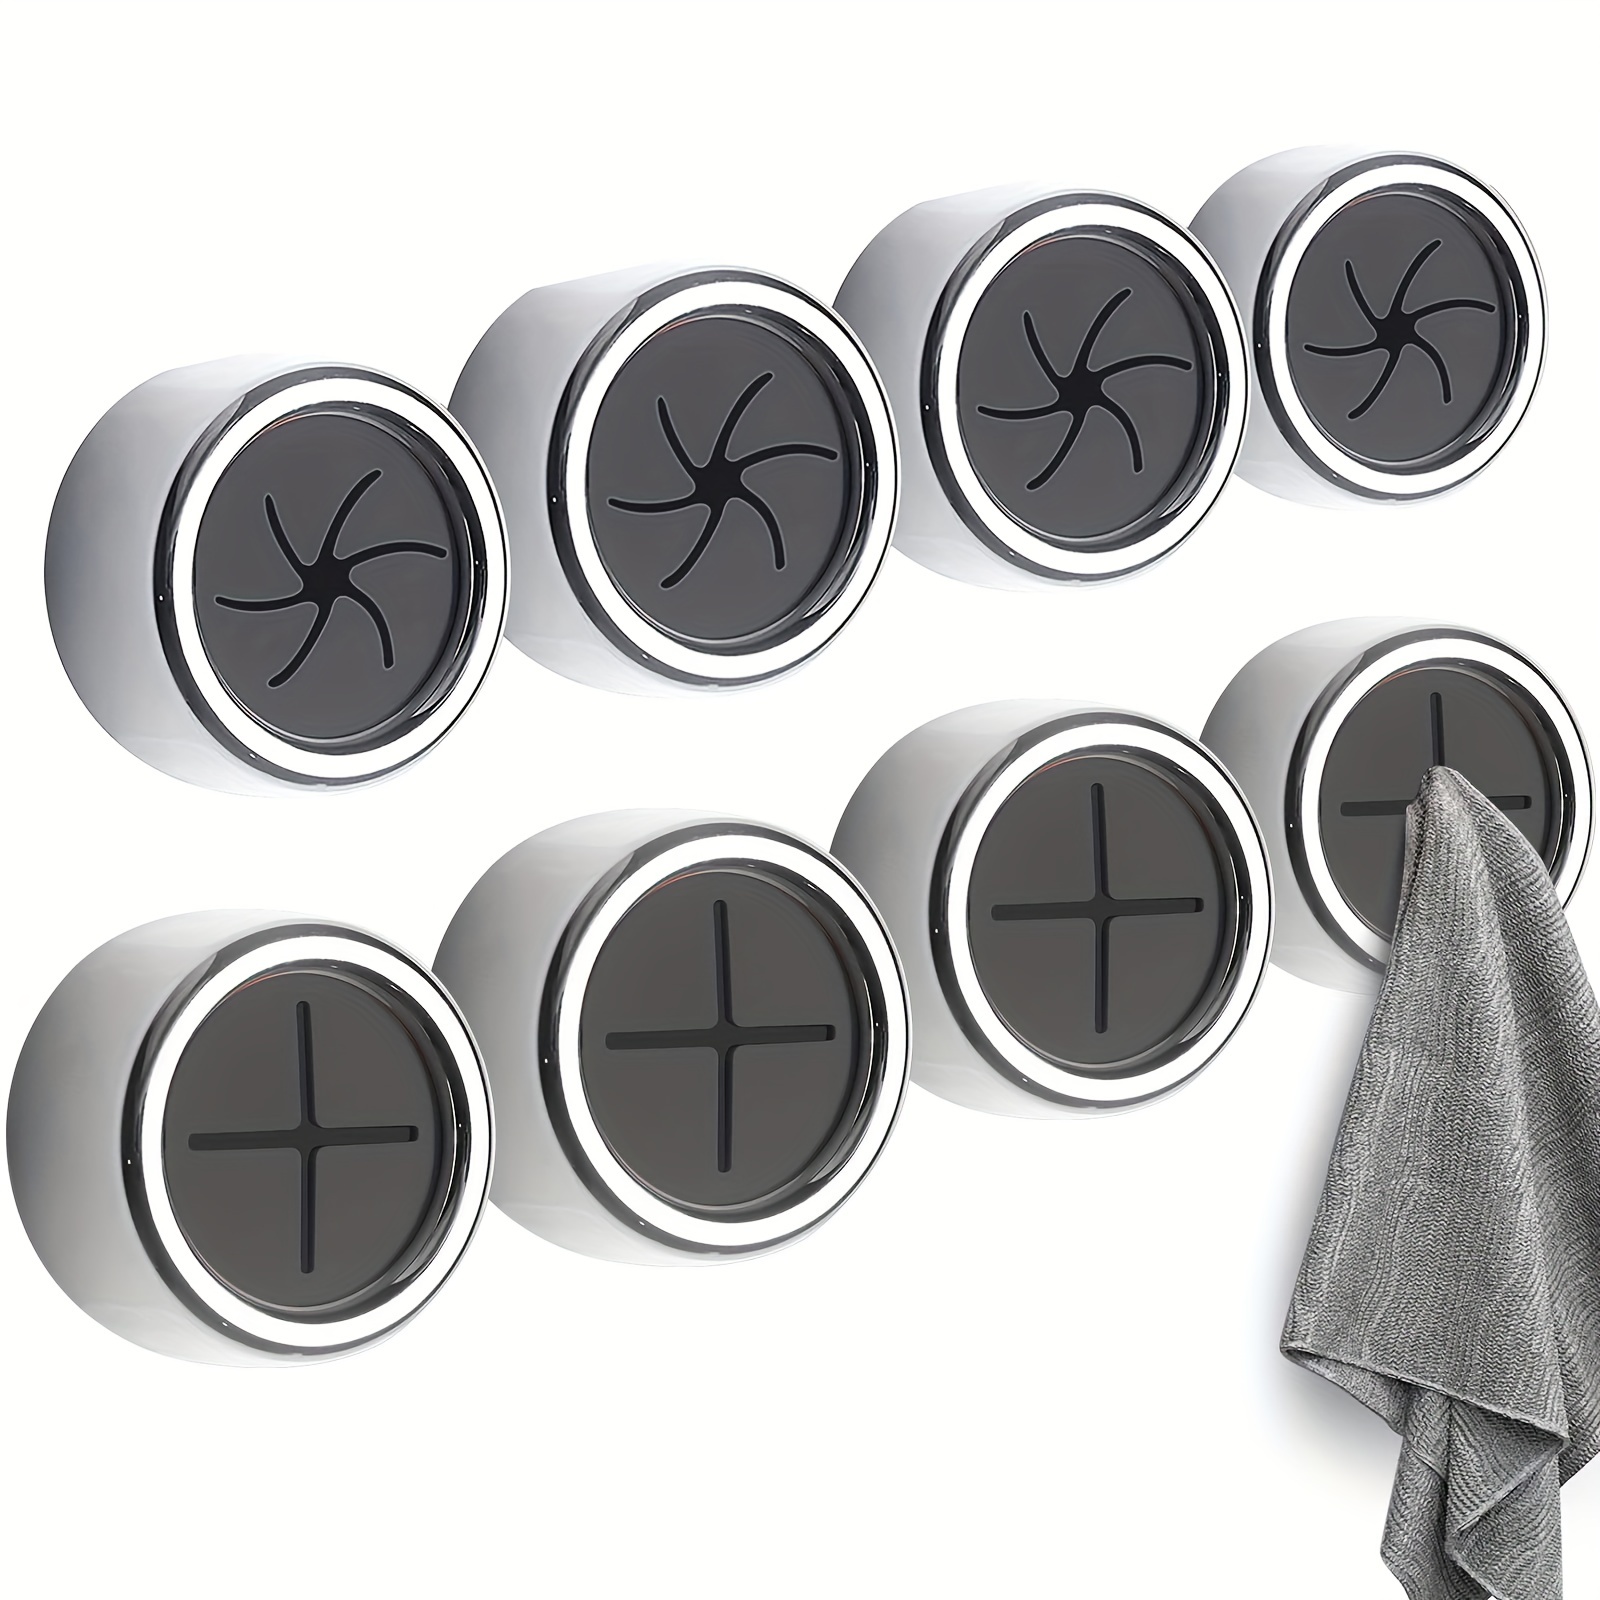 

1/3/8pcs Kitchen Towel Holder, Self Adhesive Wall Dish Towel Hook, Round Wall Mount Towel Holder For Bathroom, Kitchen And Home, Wall, Cabinet, Garage, No Drilling Required